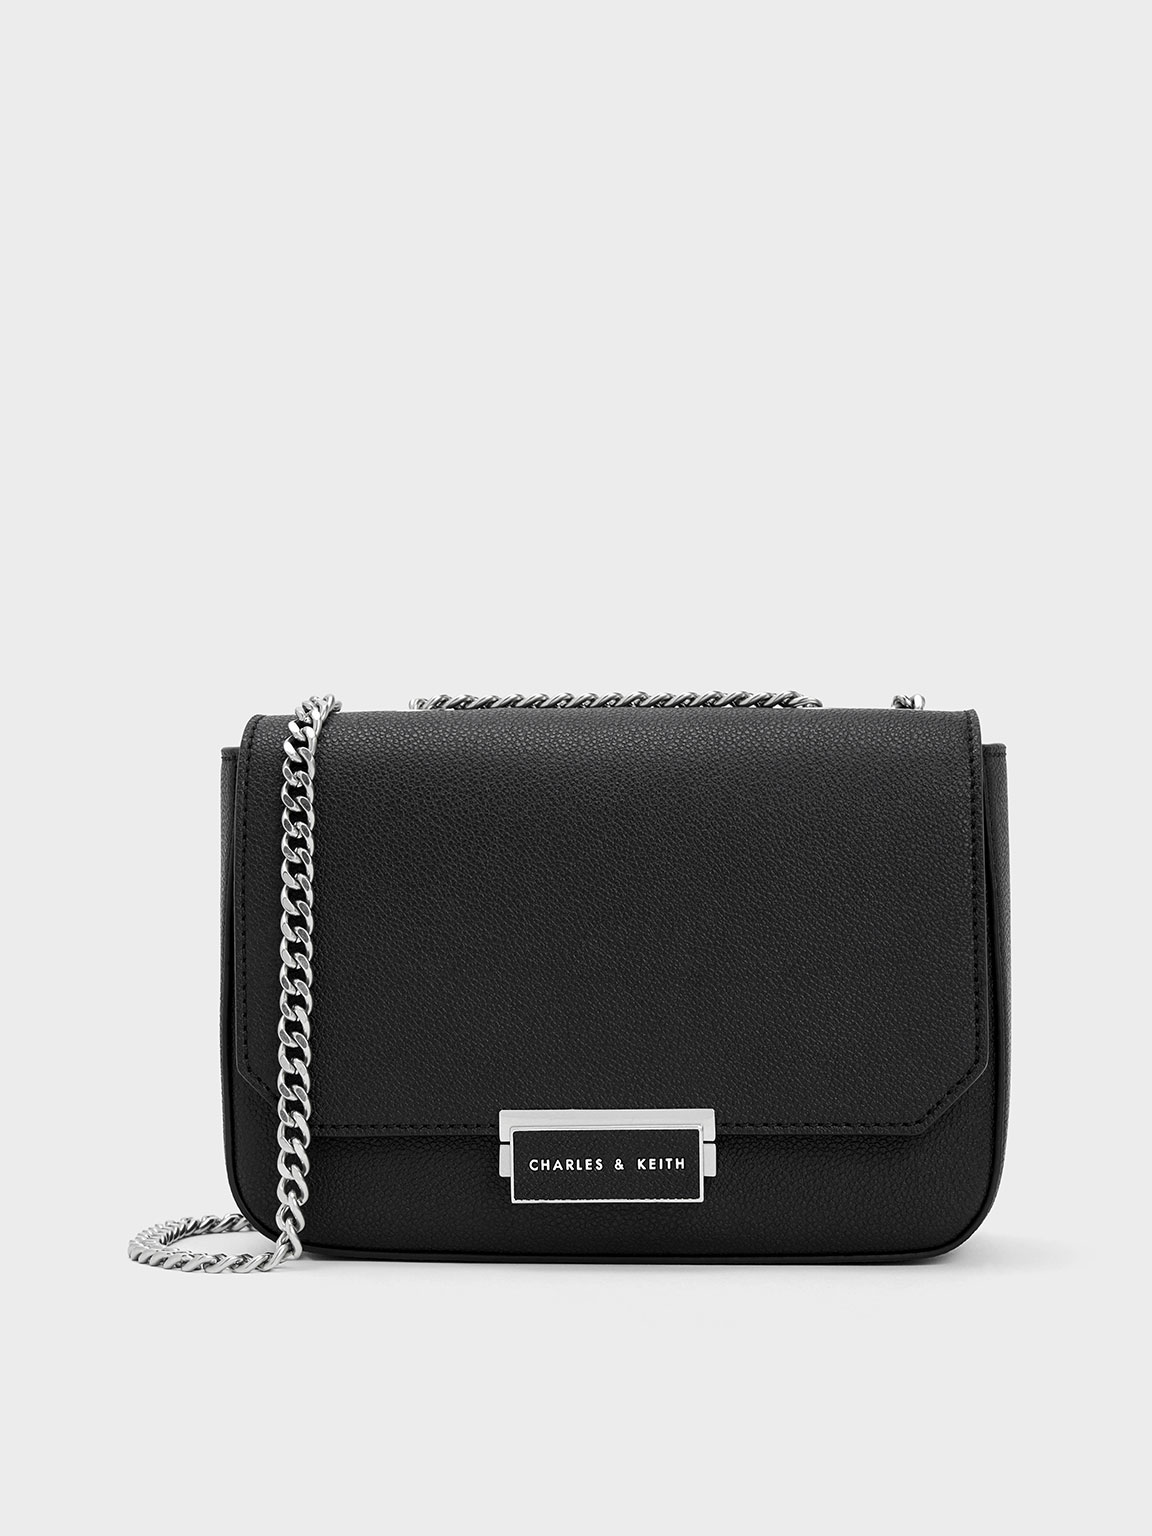 Charles & Keith Front Flap Chain Handle Crossbody Bag in Black | Lyst  Australia